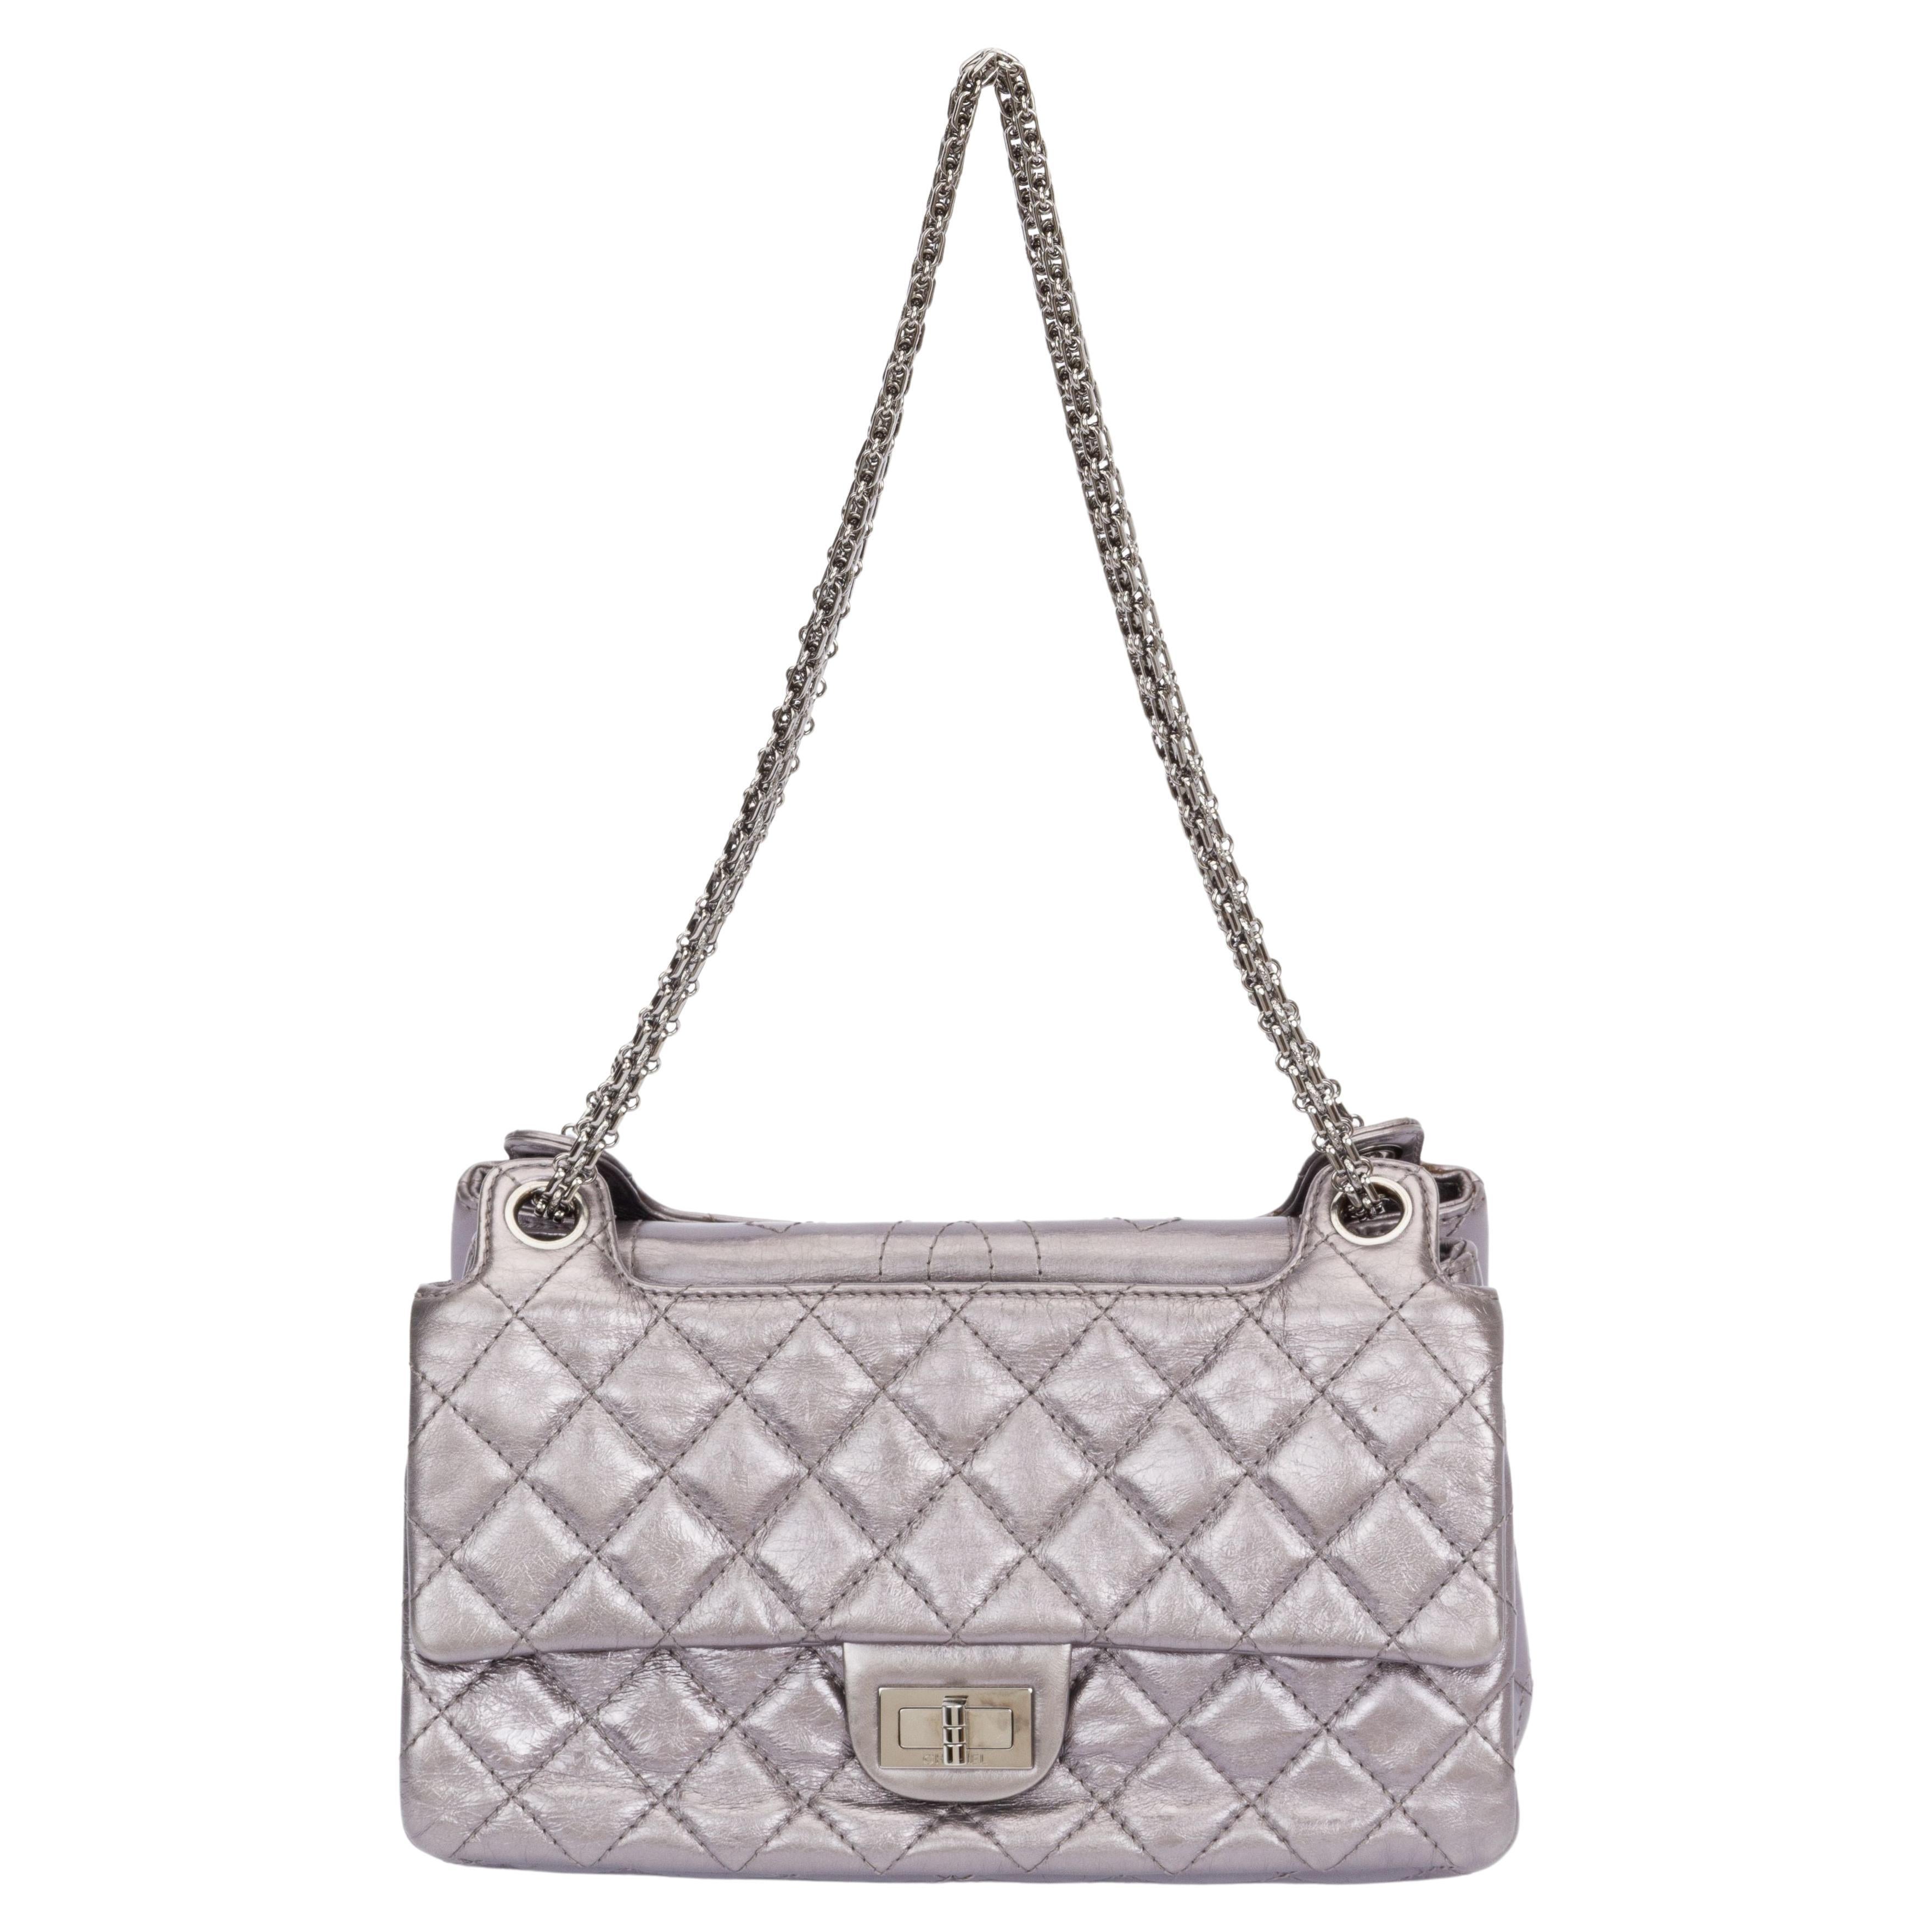 Chanel Coco Embossed Square Mini Flap Bag